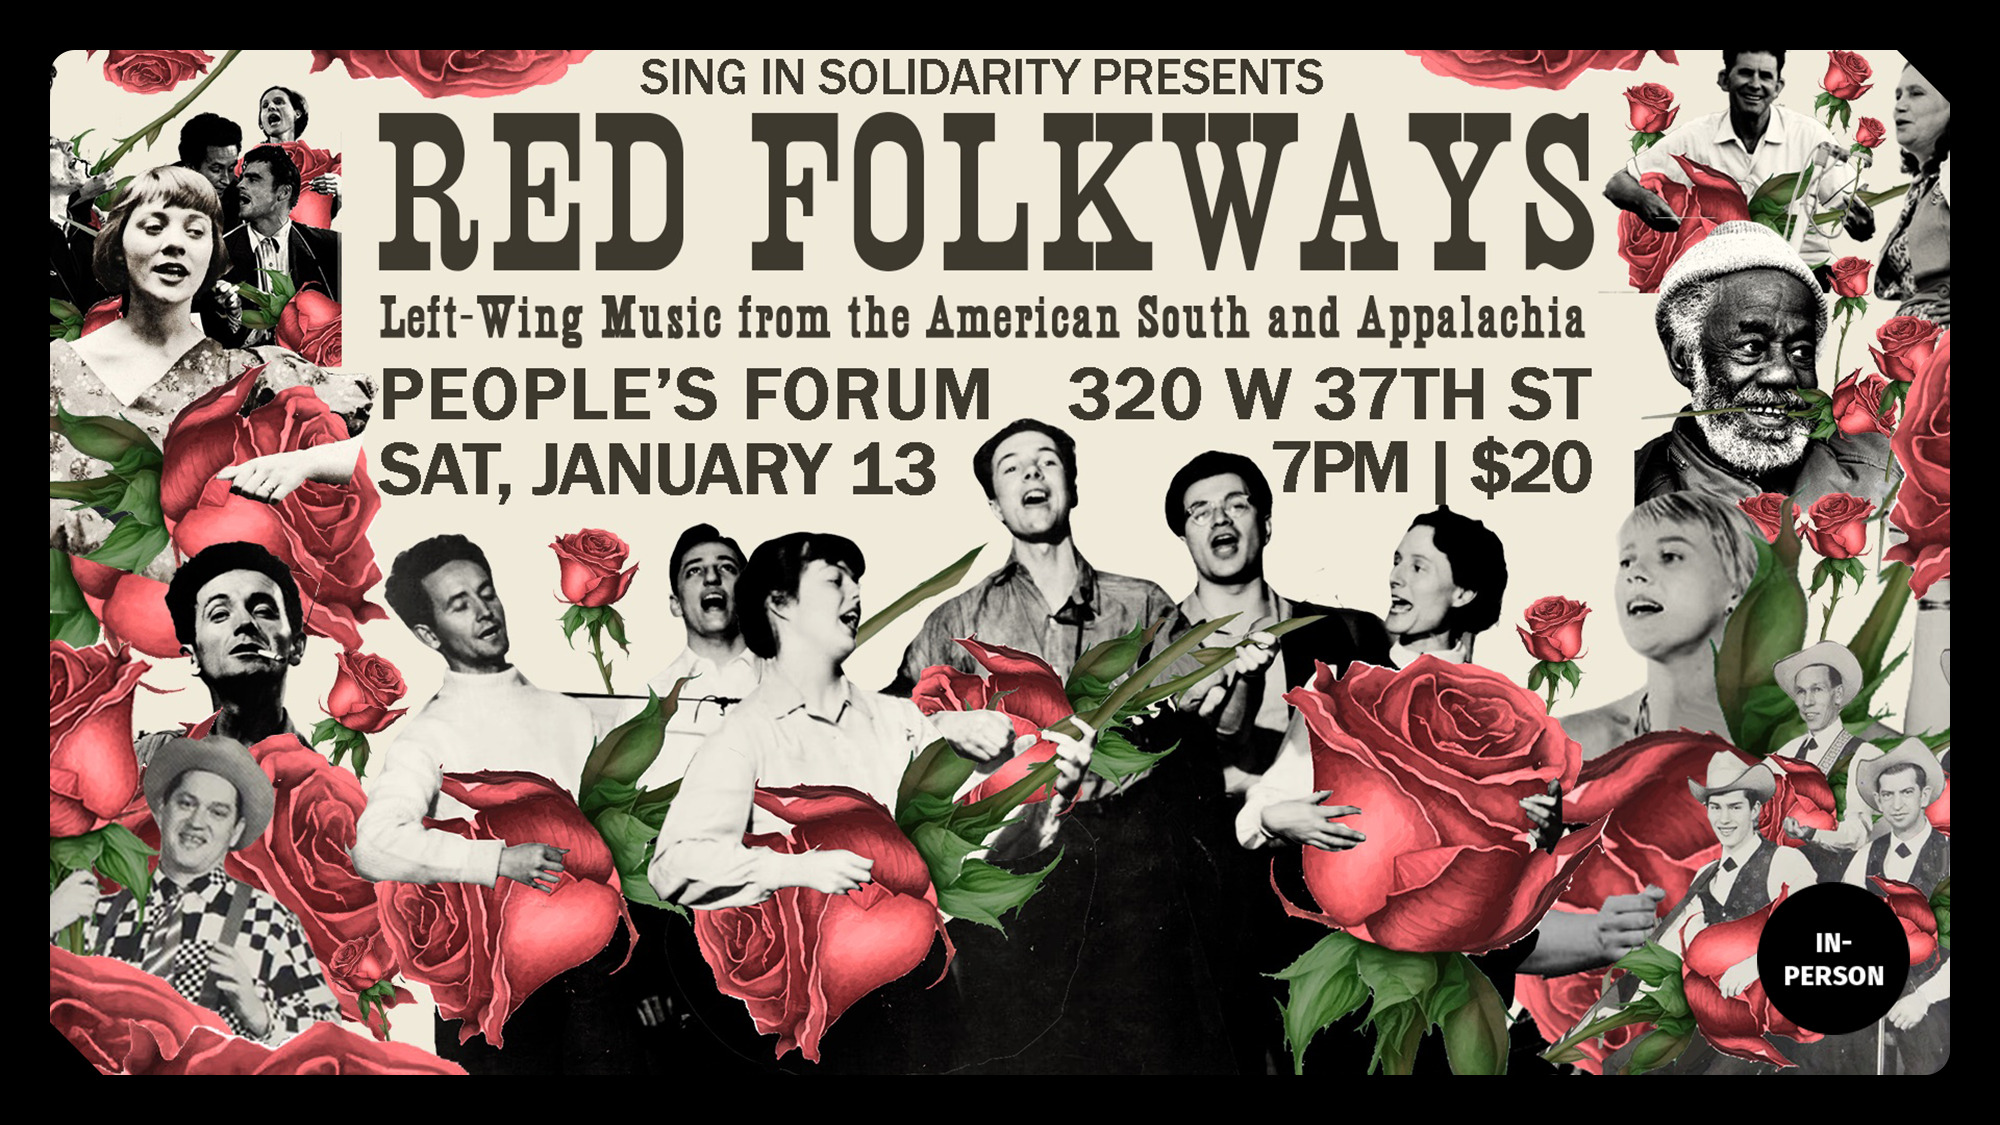 A collage of black and white photos of folk singers surrounded by and interacting with large, hand-drawn red roses. The text reads "Sing in Solidarity Presents: Red Folkways" People's Forum, 320 W 37th Street